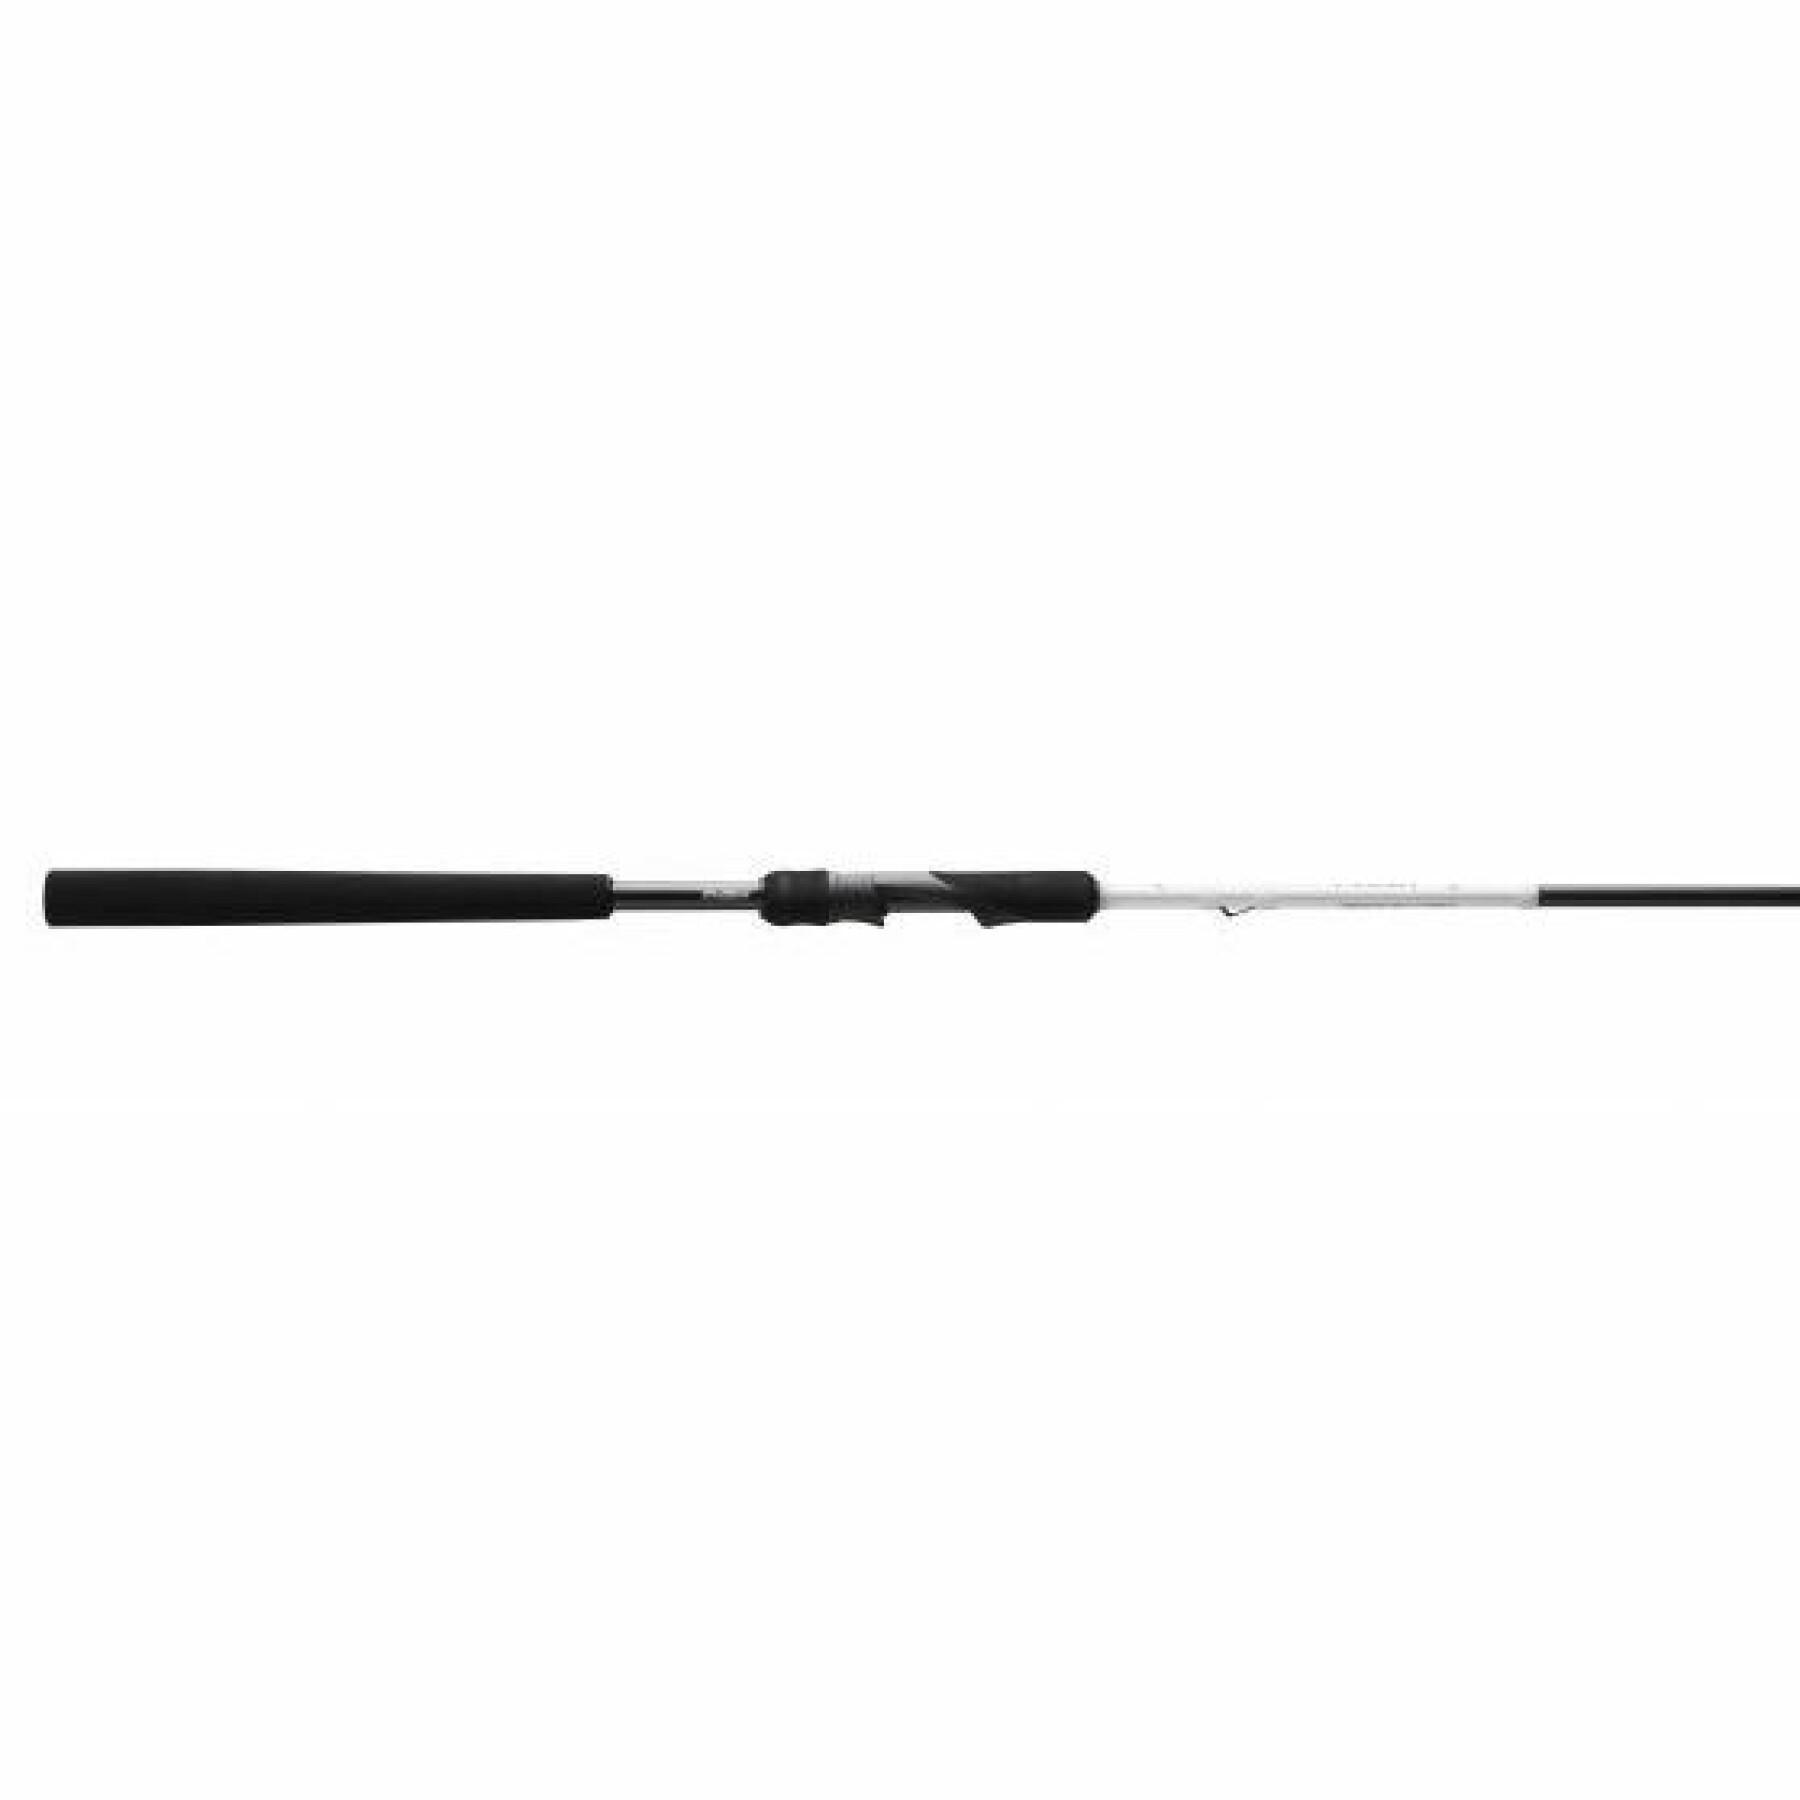 Cana 13 Fishing Rely S Spin 2,49m 20-80g